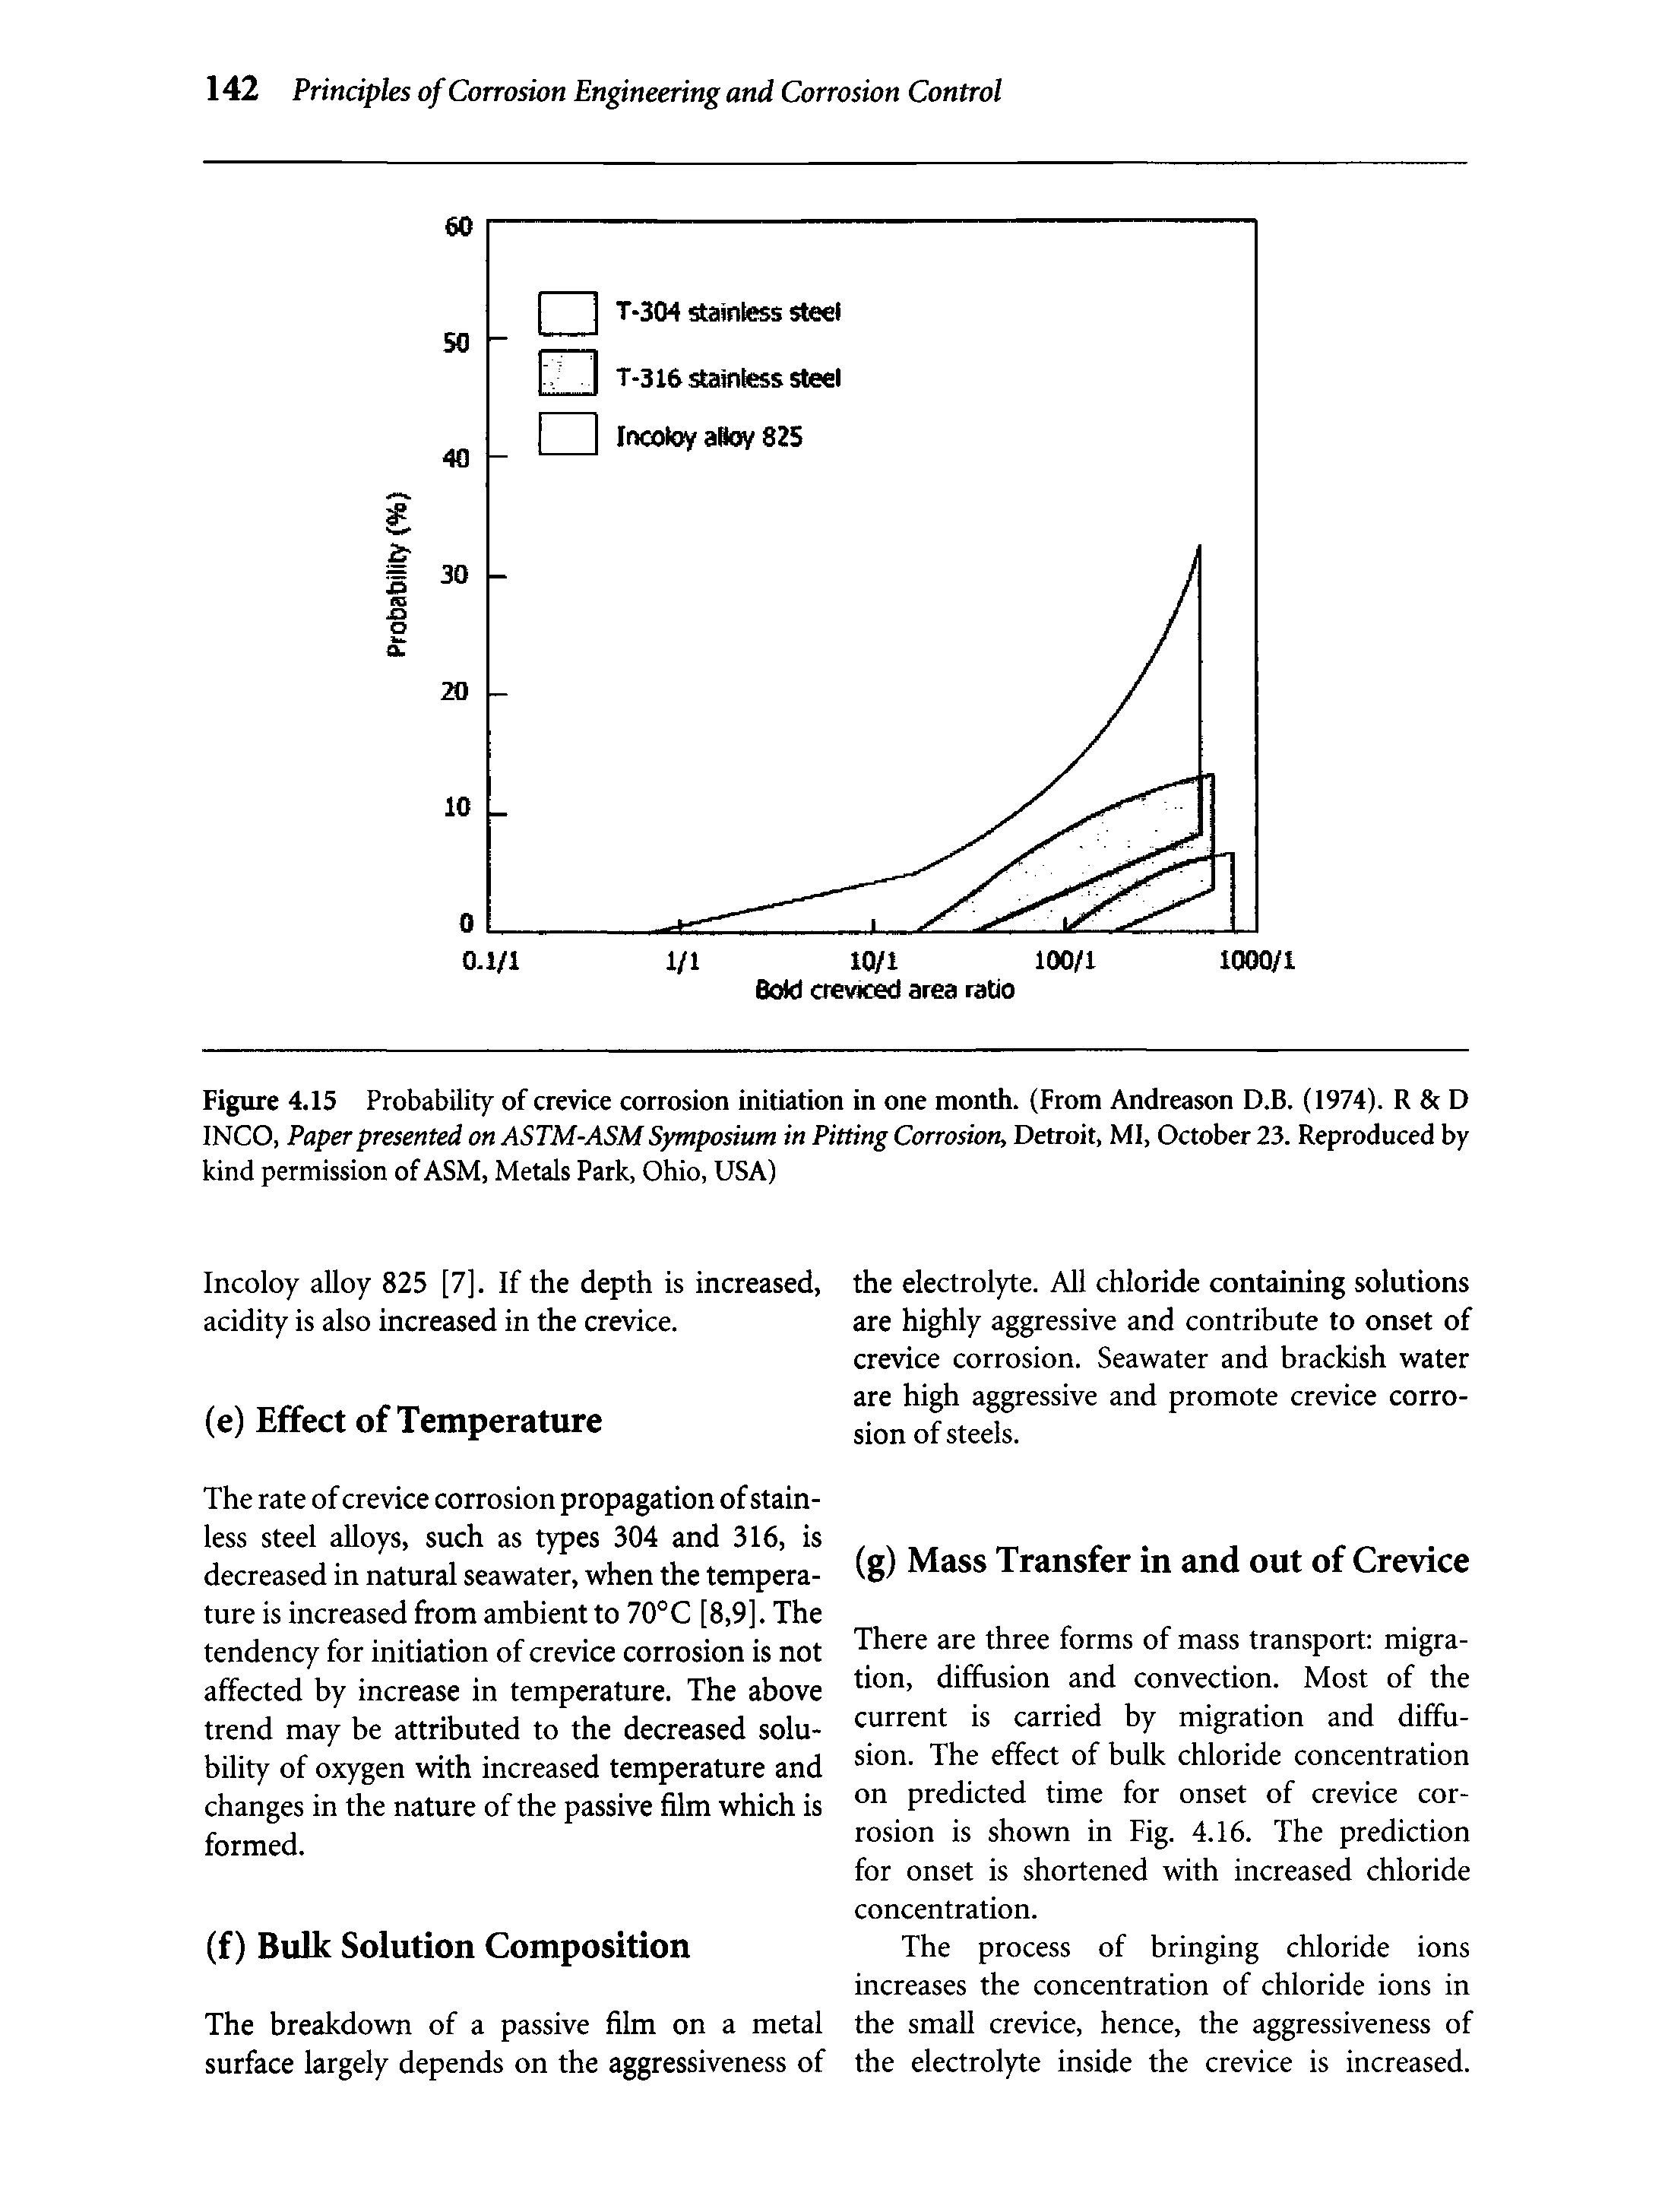 Figure 4.15 Probability of crevice corrosion initiation in one month. (From Andreason D.B. (1974). R D INCO, Paper presented on ASTM-ASM Symposium in Pitting Corrosion, Detroit, Ml, October 23. Reproduced by kind permission of ASM, Metals Park, Ohio, USA)...